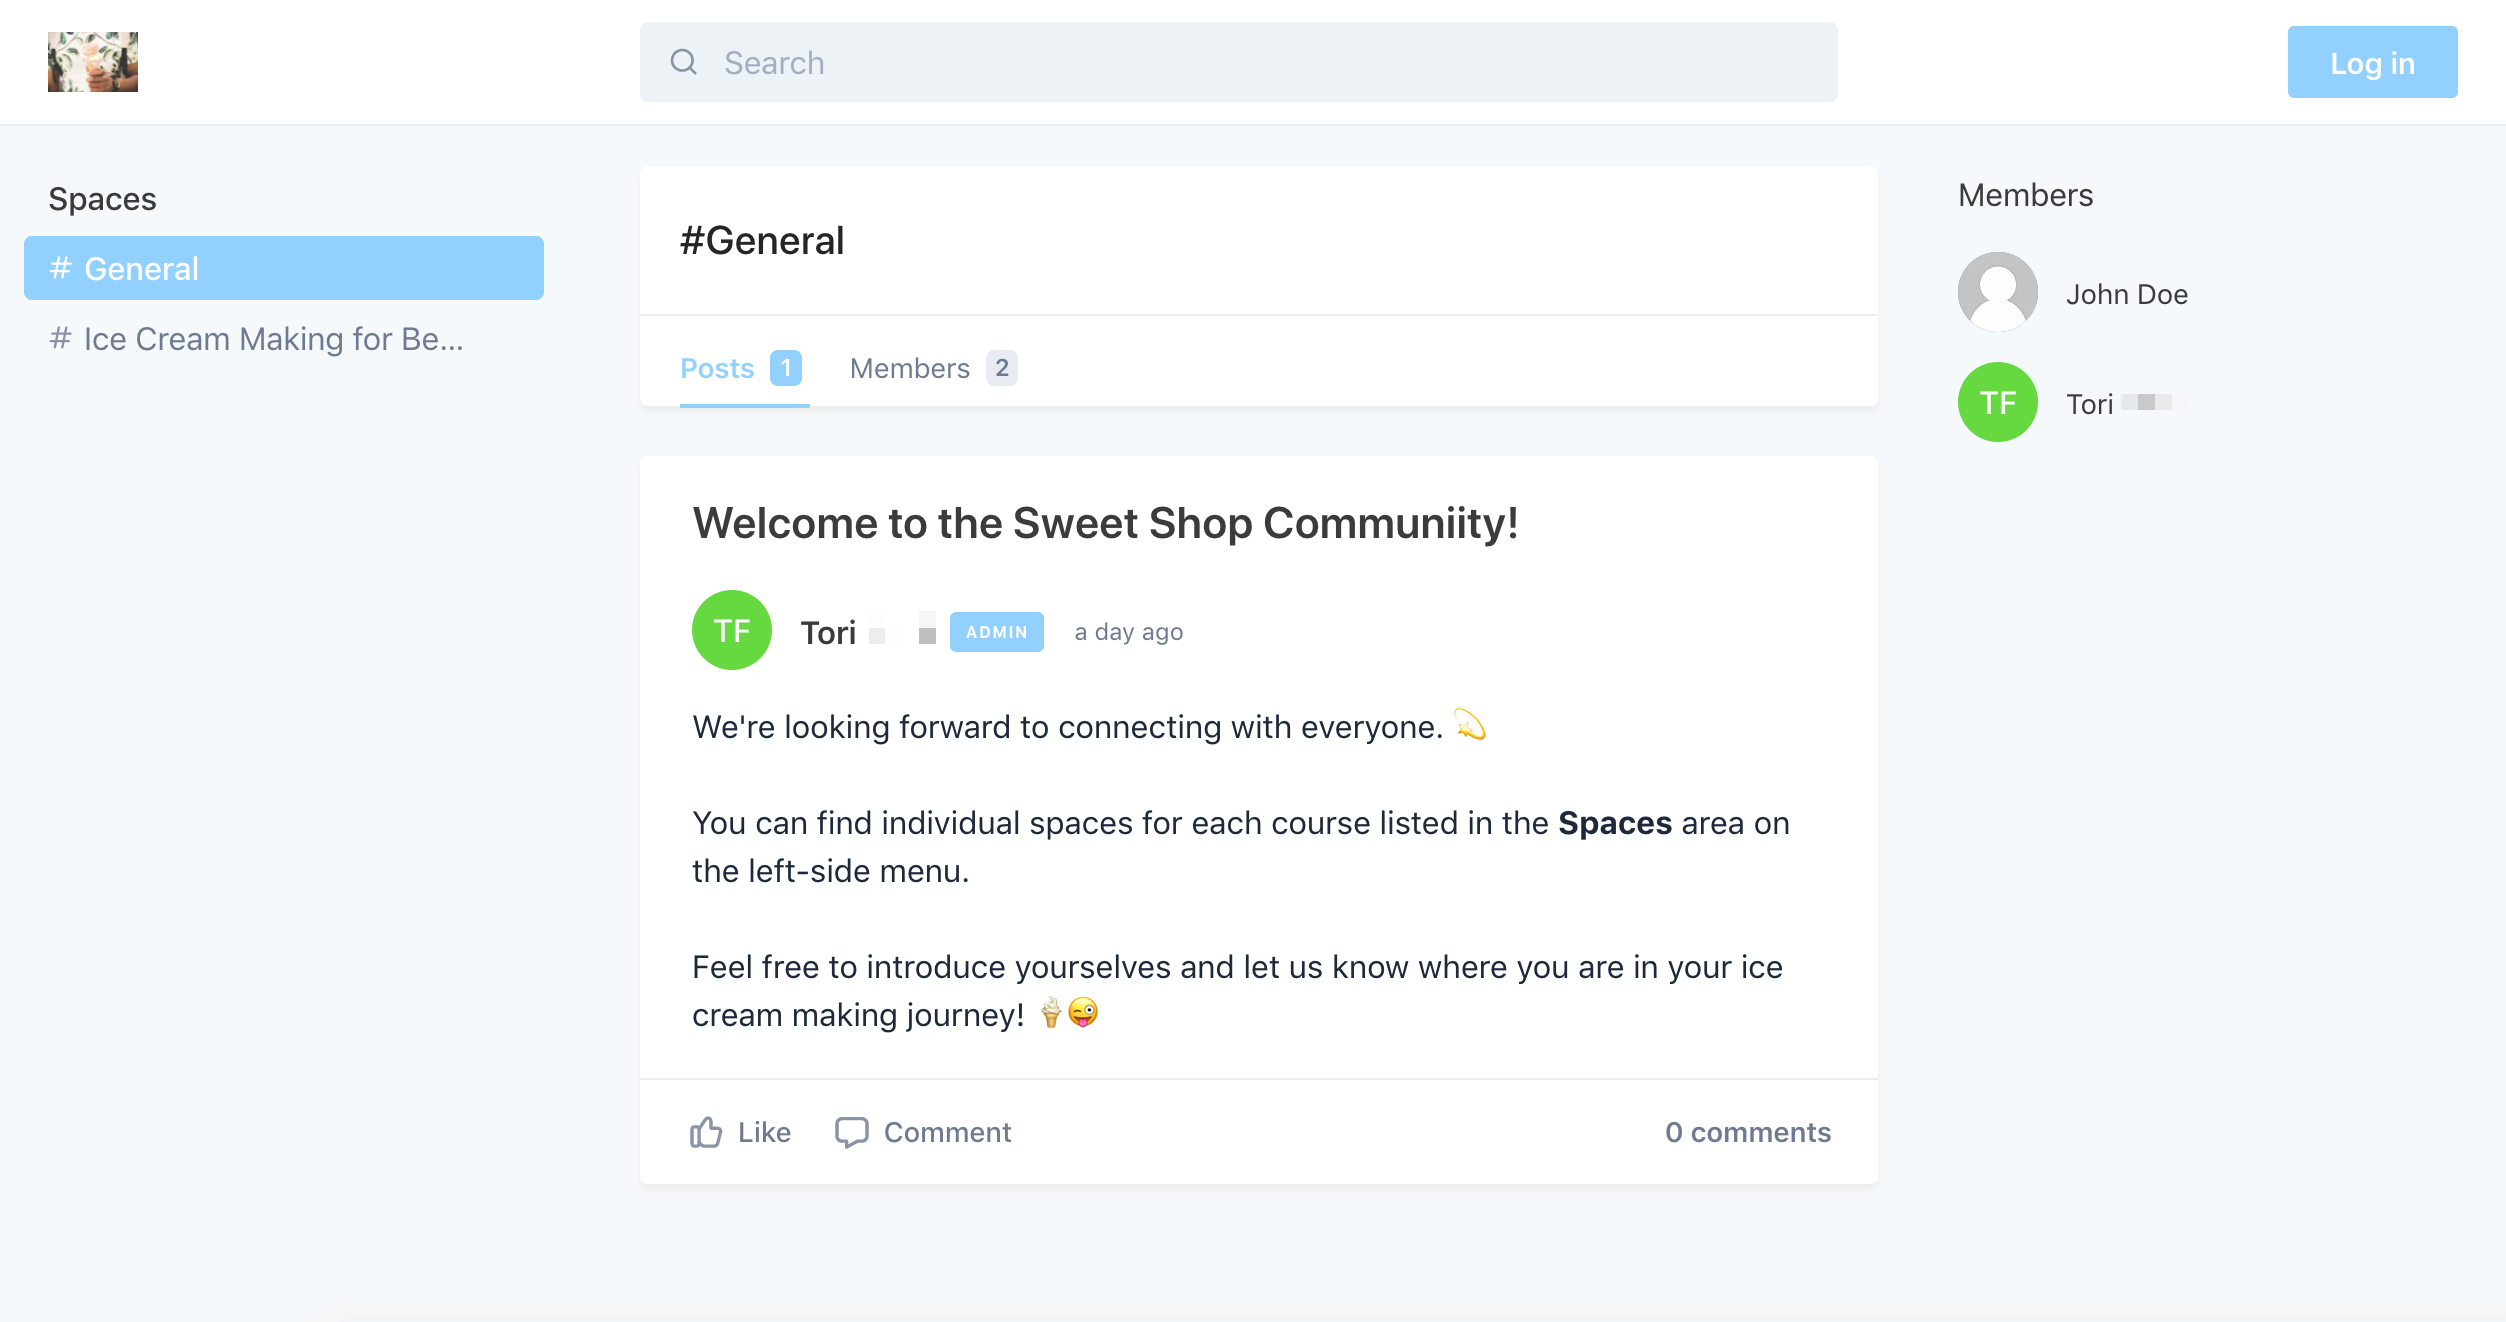 The screen shows the homepage of a community on the CIRCLE platform. There is a welcome message from the community moderator welcoming people to the community.